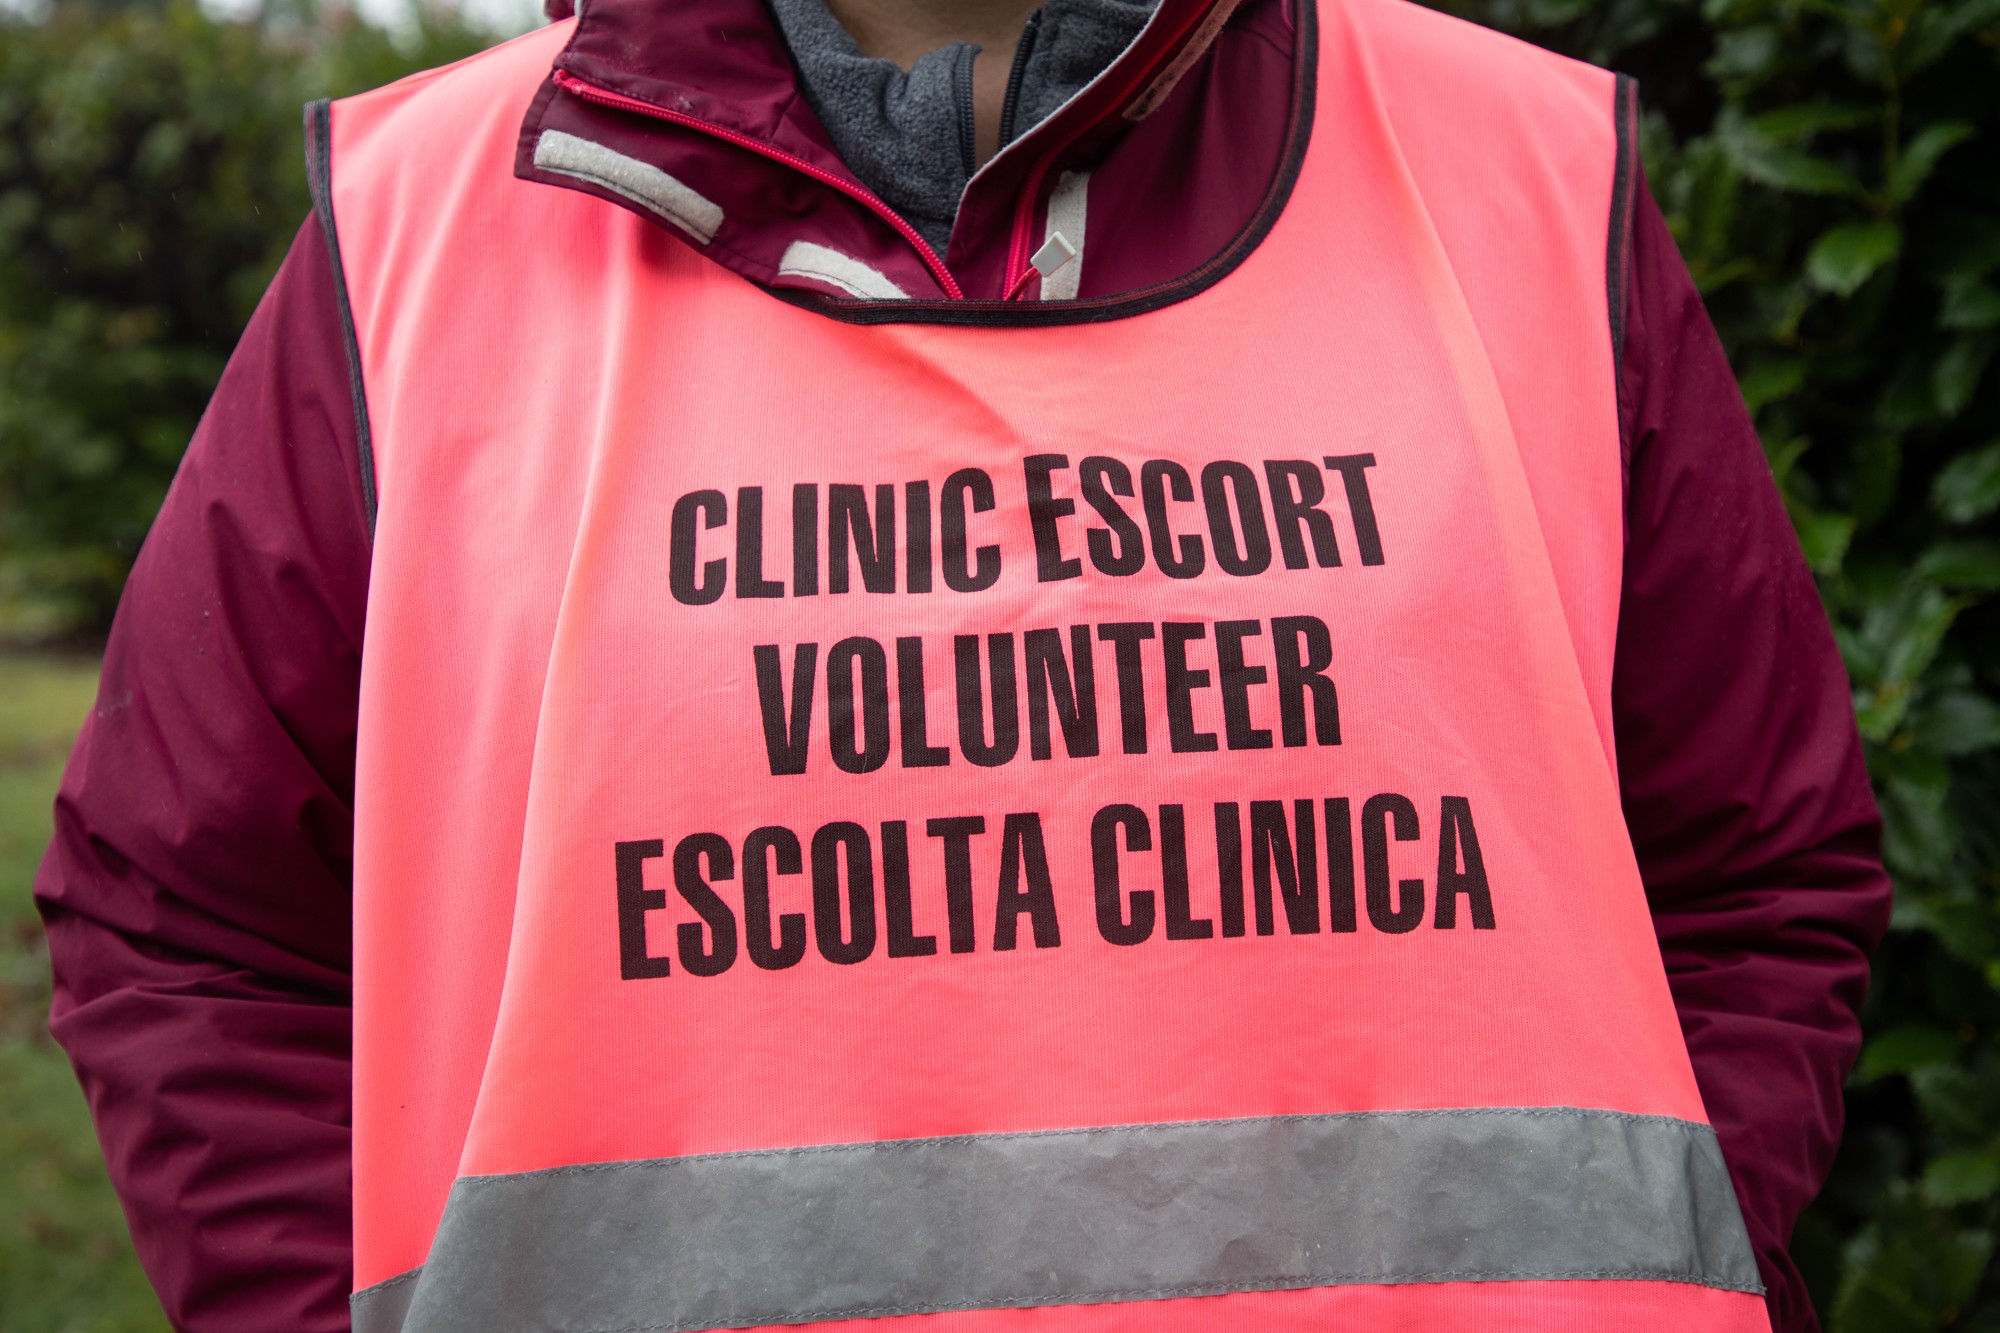 An individual wears a bright pink vest that reads “Clinic Escort, Escolta Clinica.”
